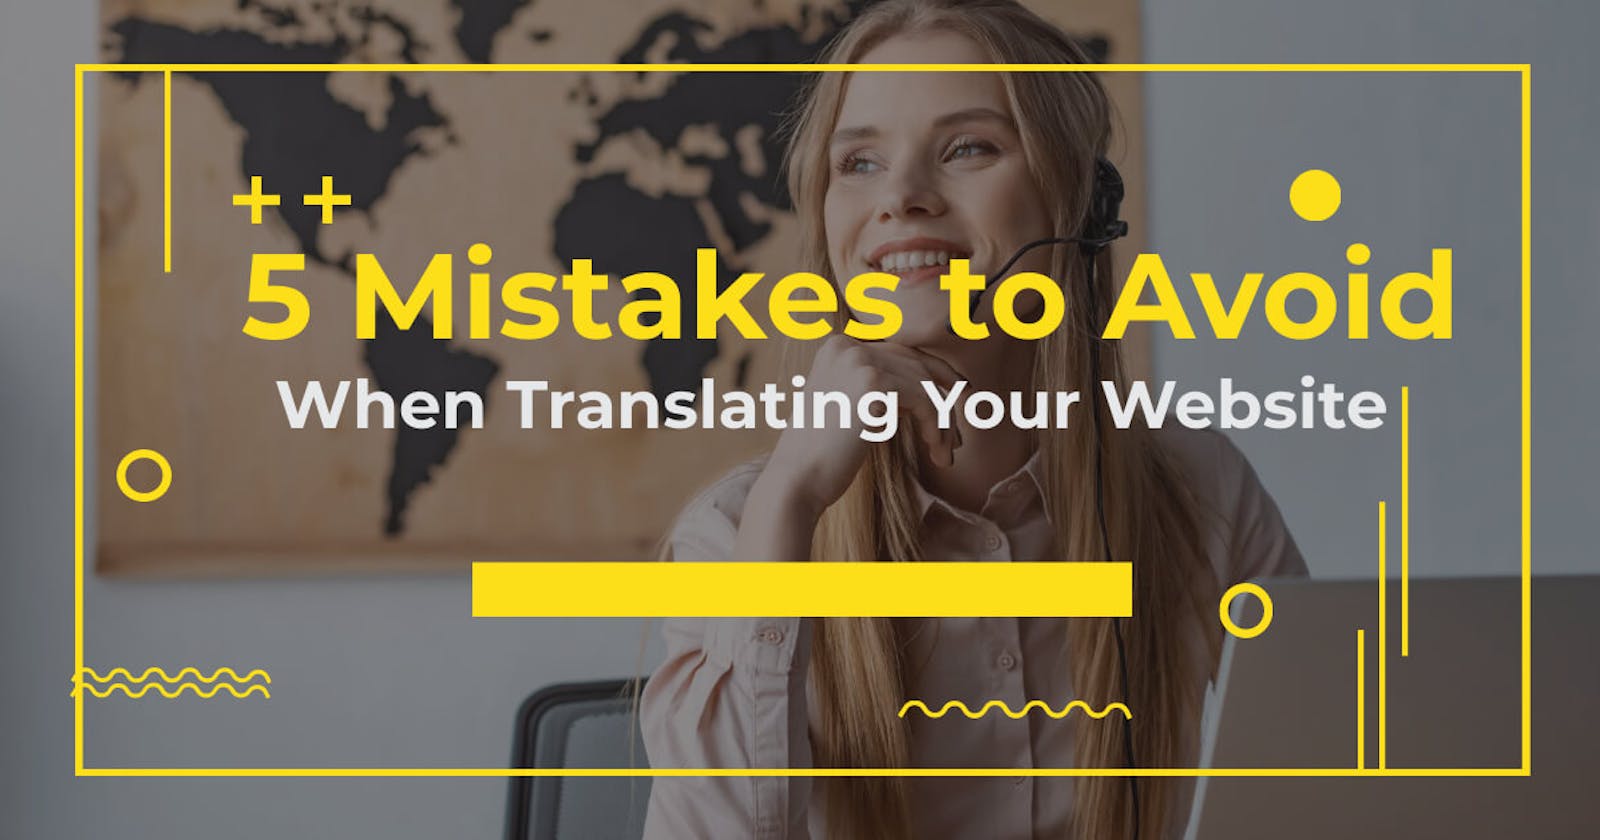 5 Mistakes to Avoid When Translating Your Website